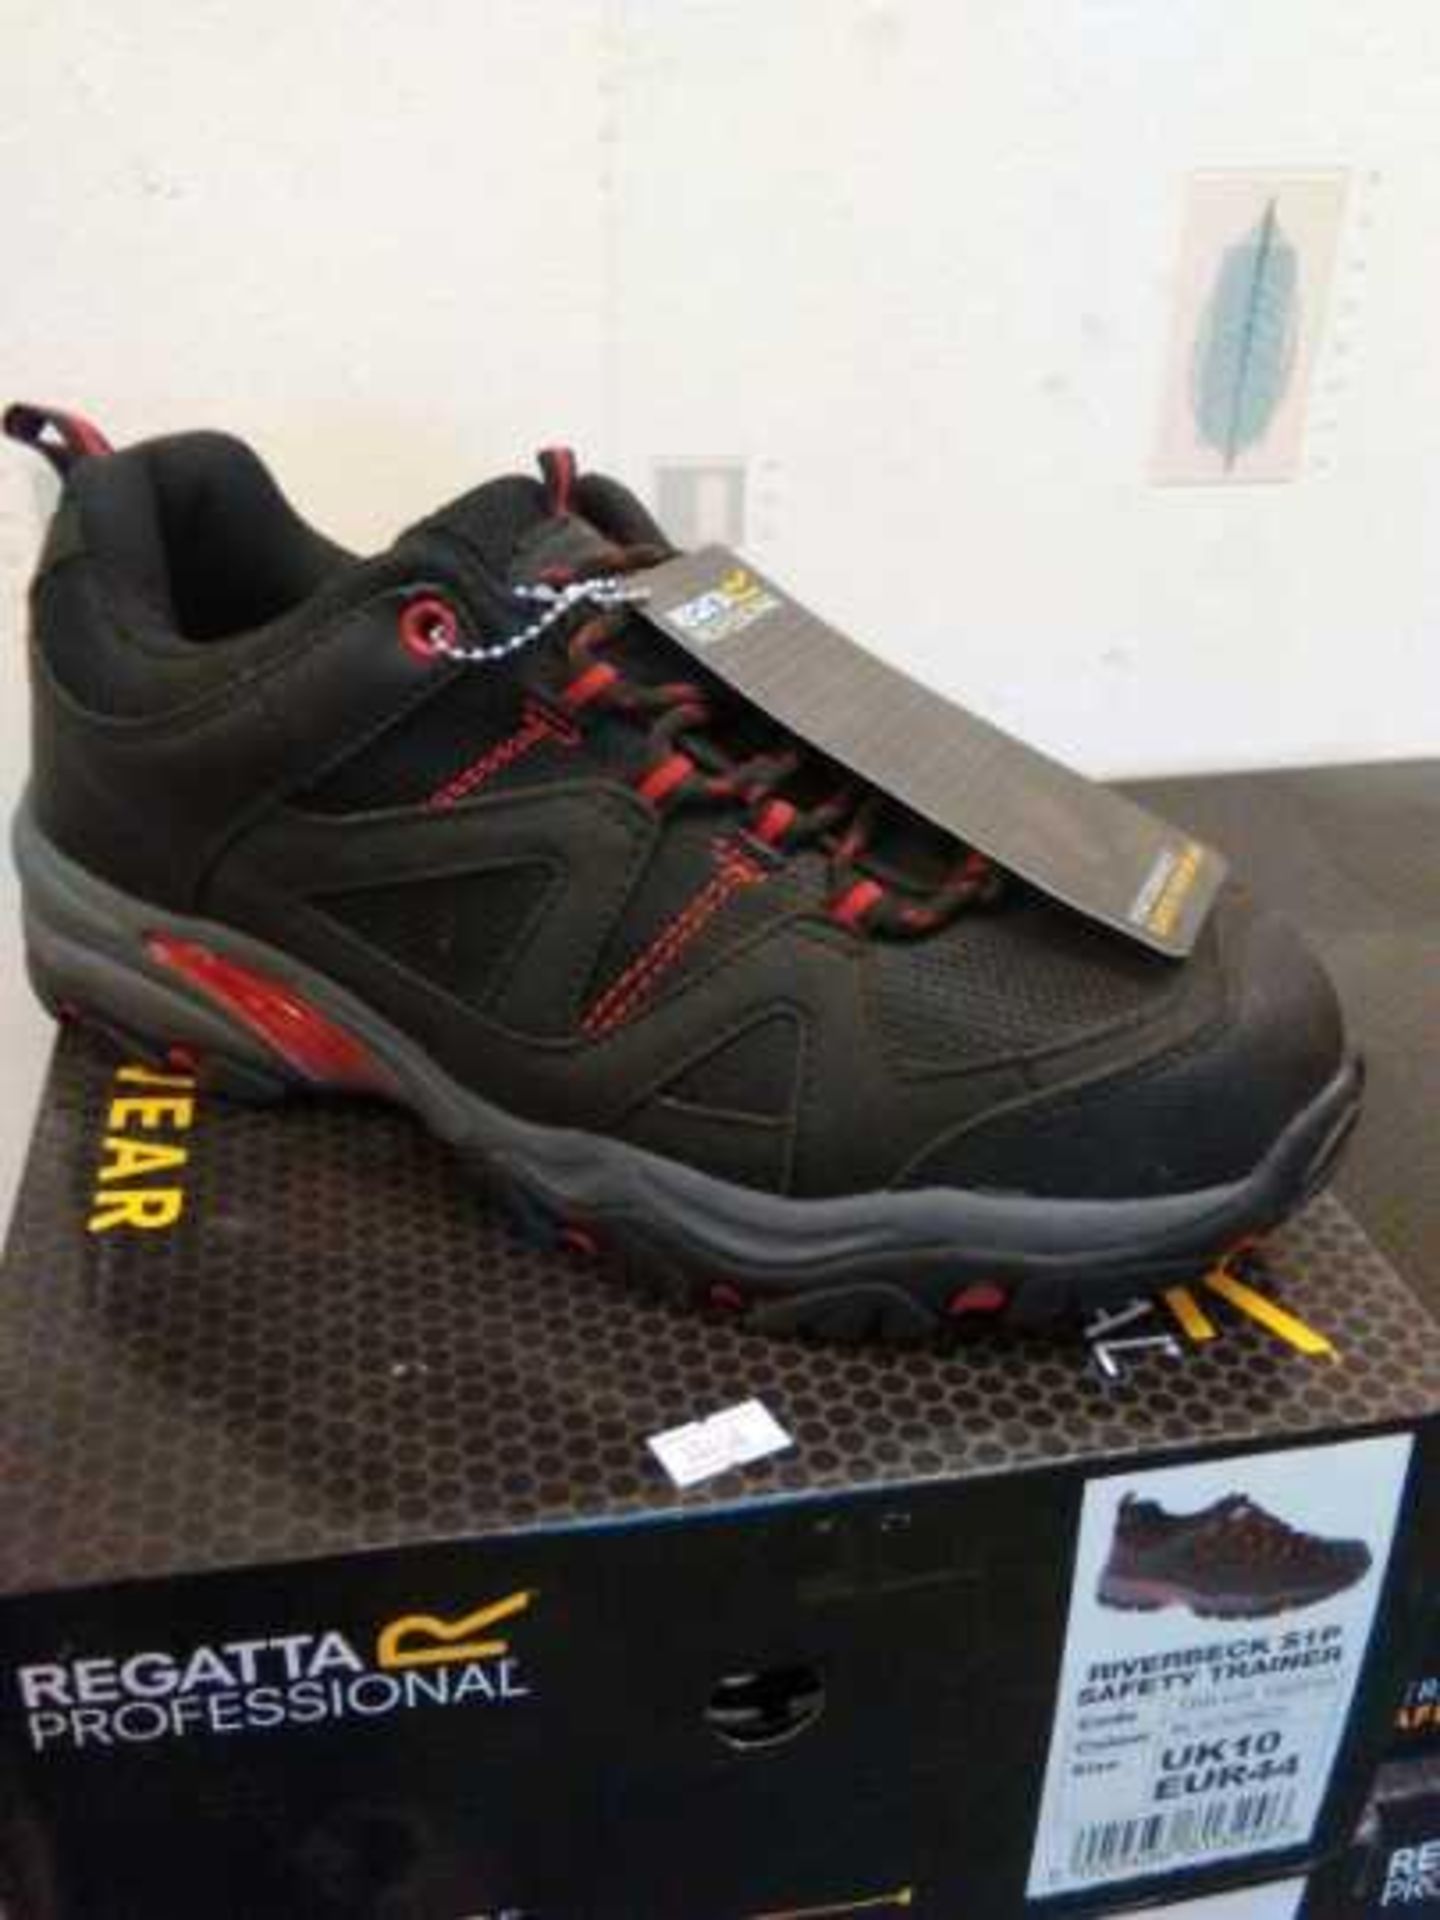 REGATTA HARDWEAR RIVERBECK S1P SAFETY TRAINERS. Size 9 (EUR 43). New and boxed.  Material: PU,